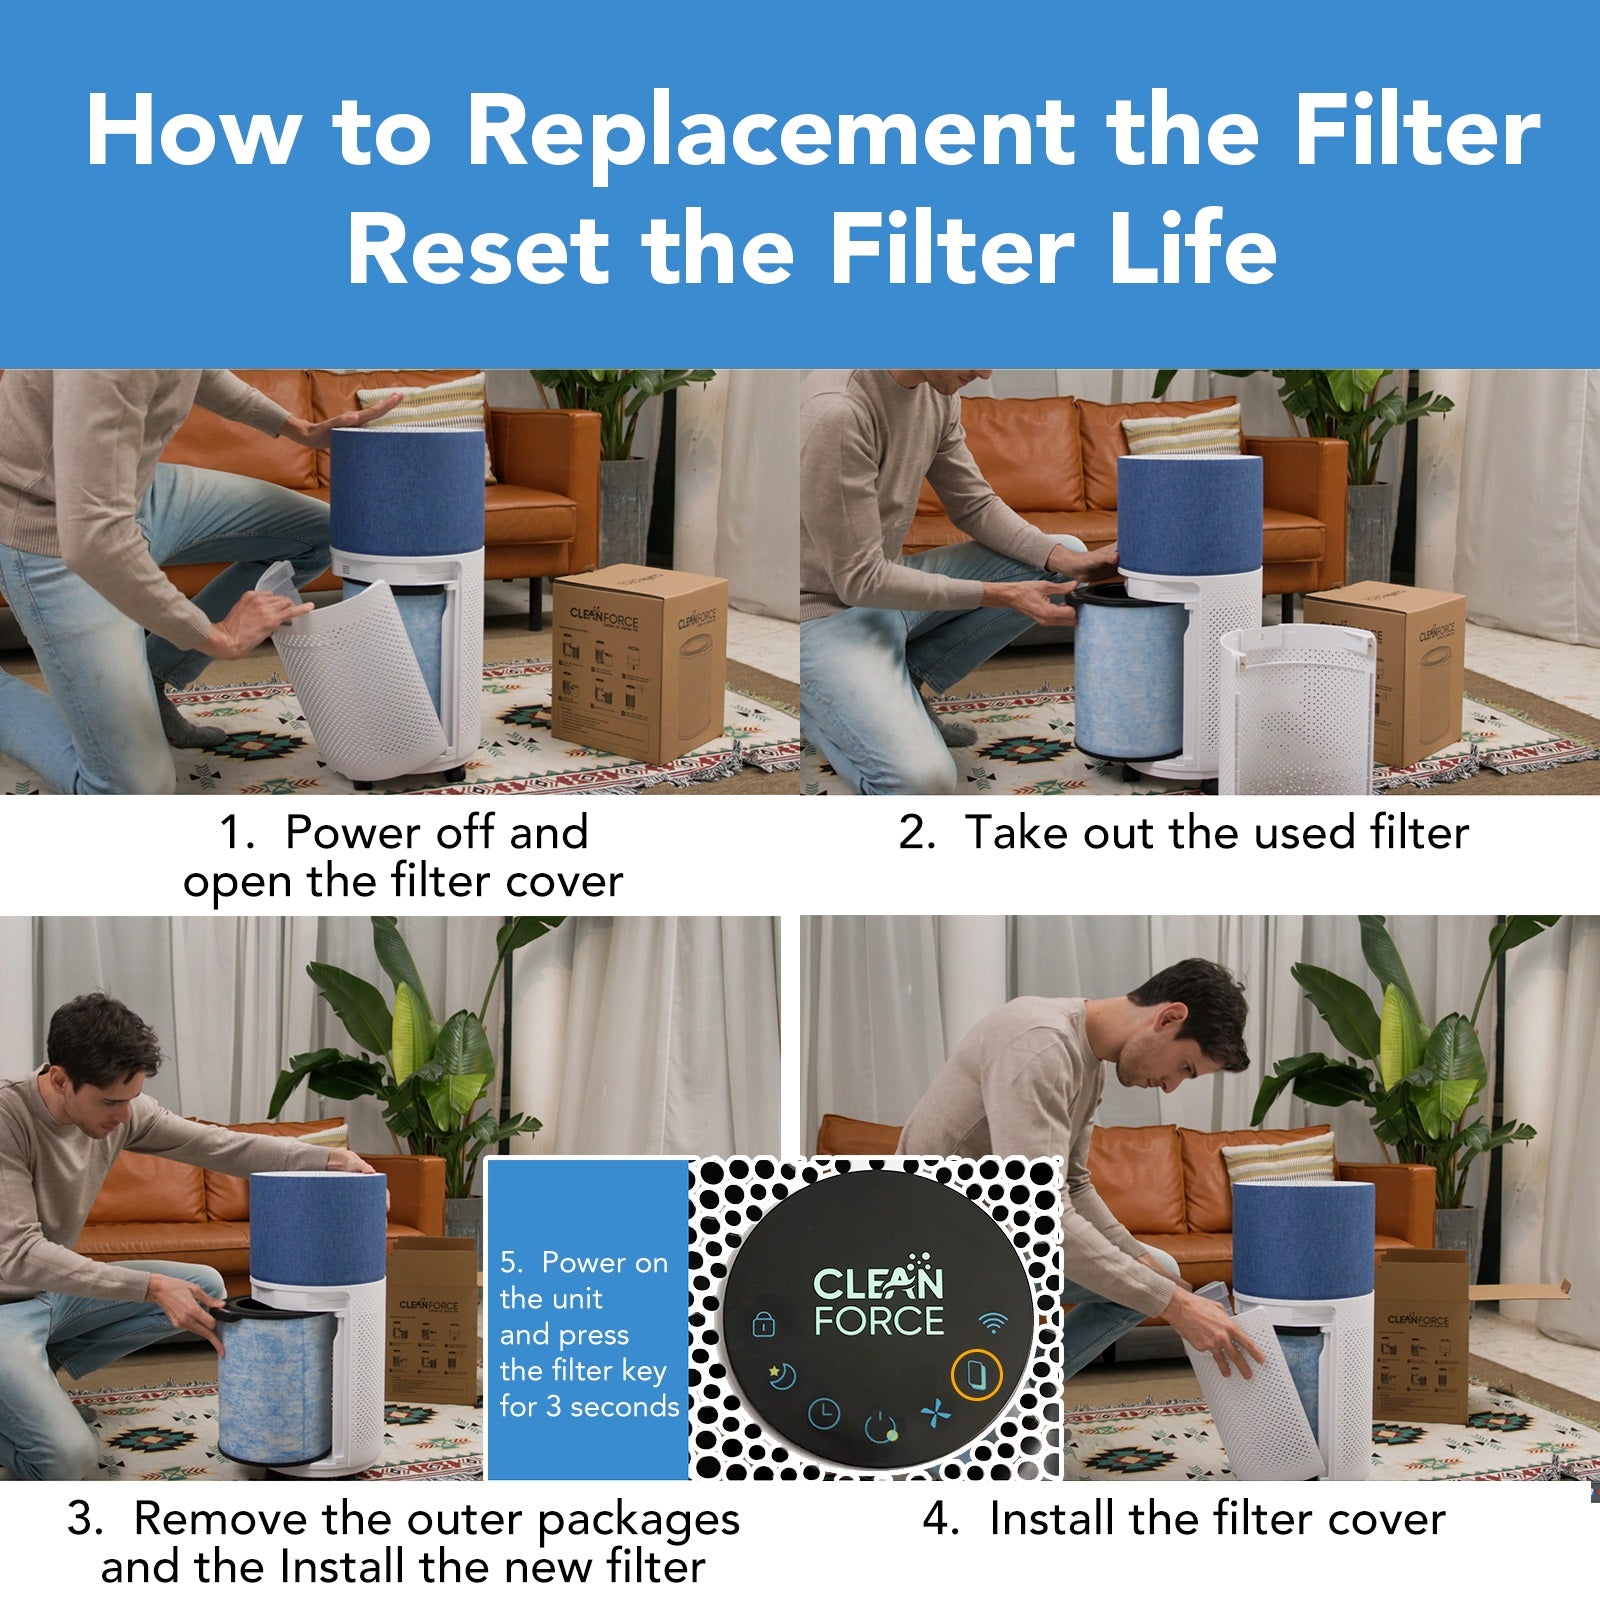 CleanForce AllerSync MaxPure H13 Ture HEPA Air Filter for Rainbow Series, Sanitized® treated, removes Dust, Somke, Allergens, Pollen, Pet Hair Dander and Odors